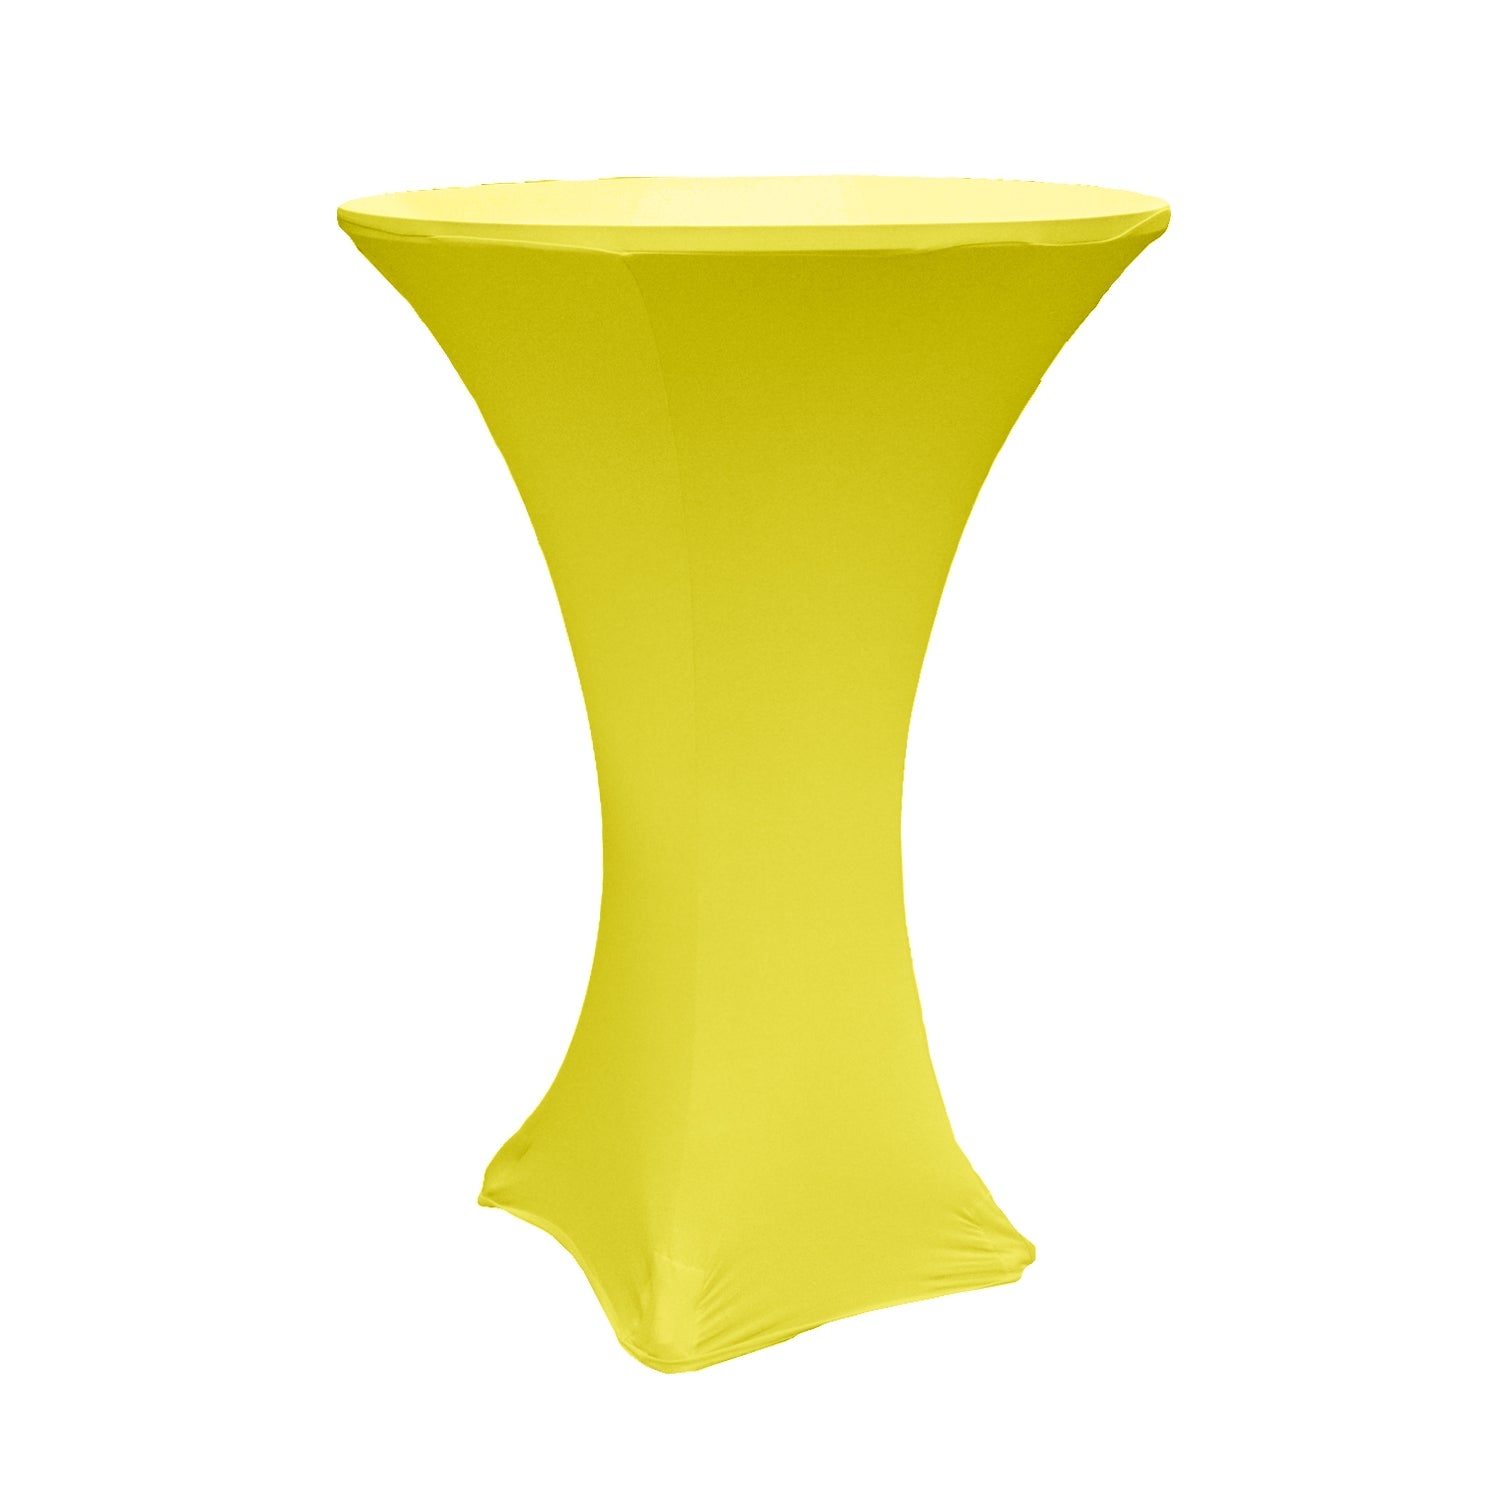 Spandex Cocktail Table Cover 30" Round - Bright Yellow - CV Linens